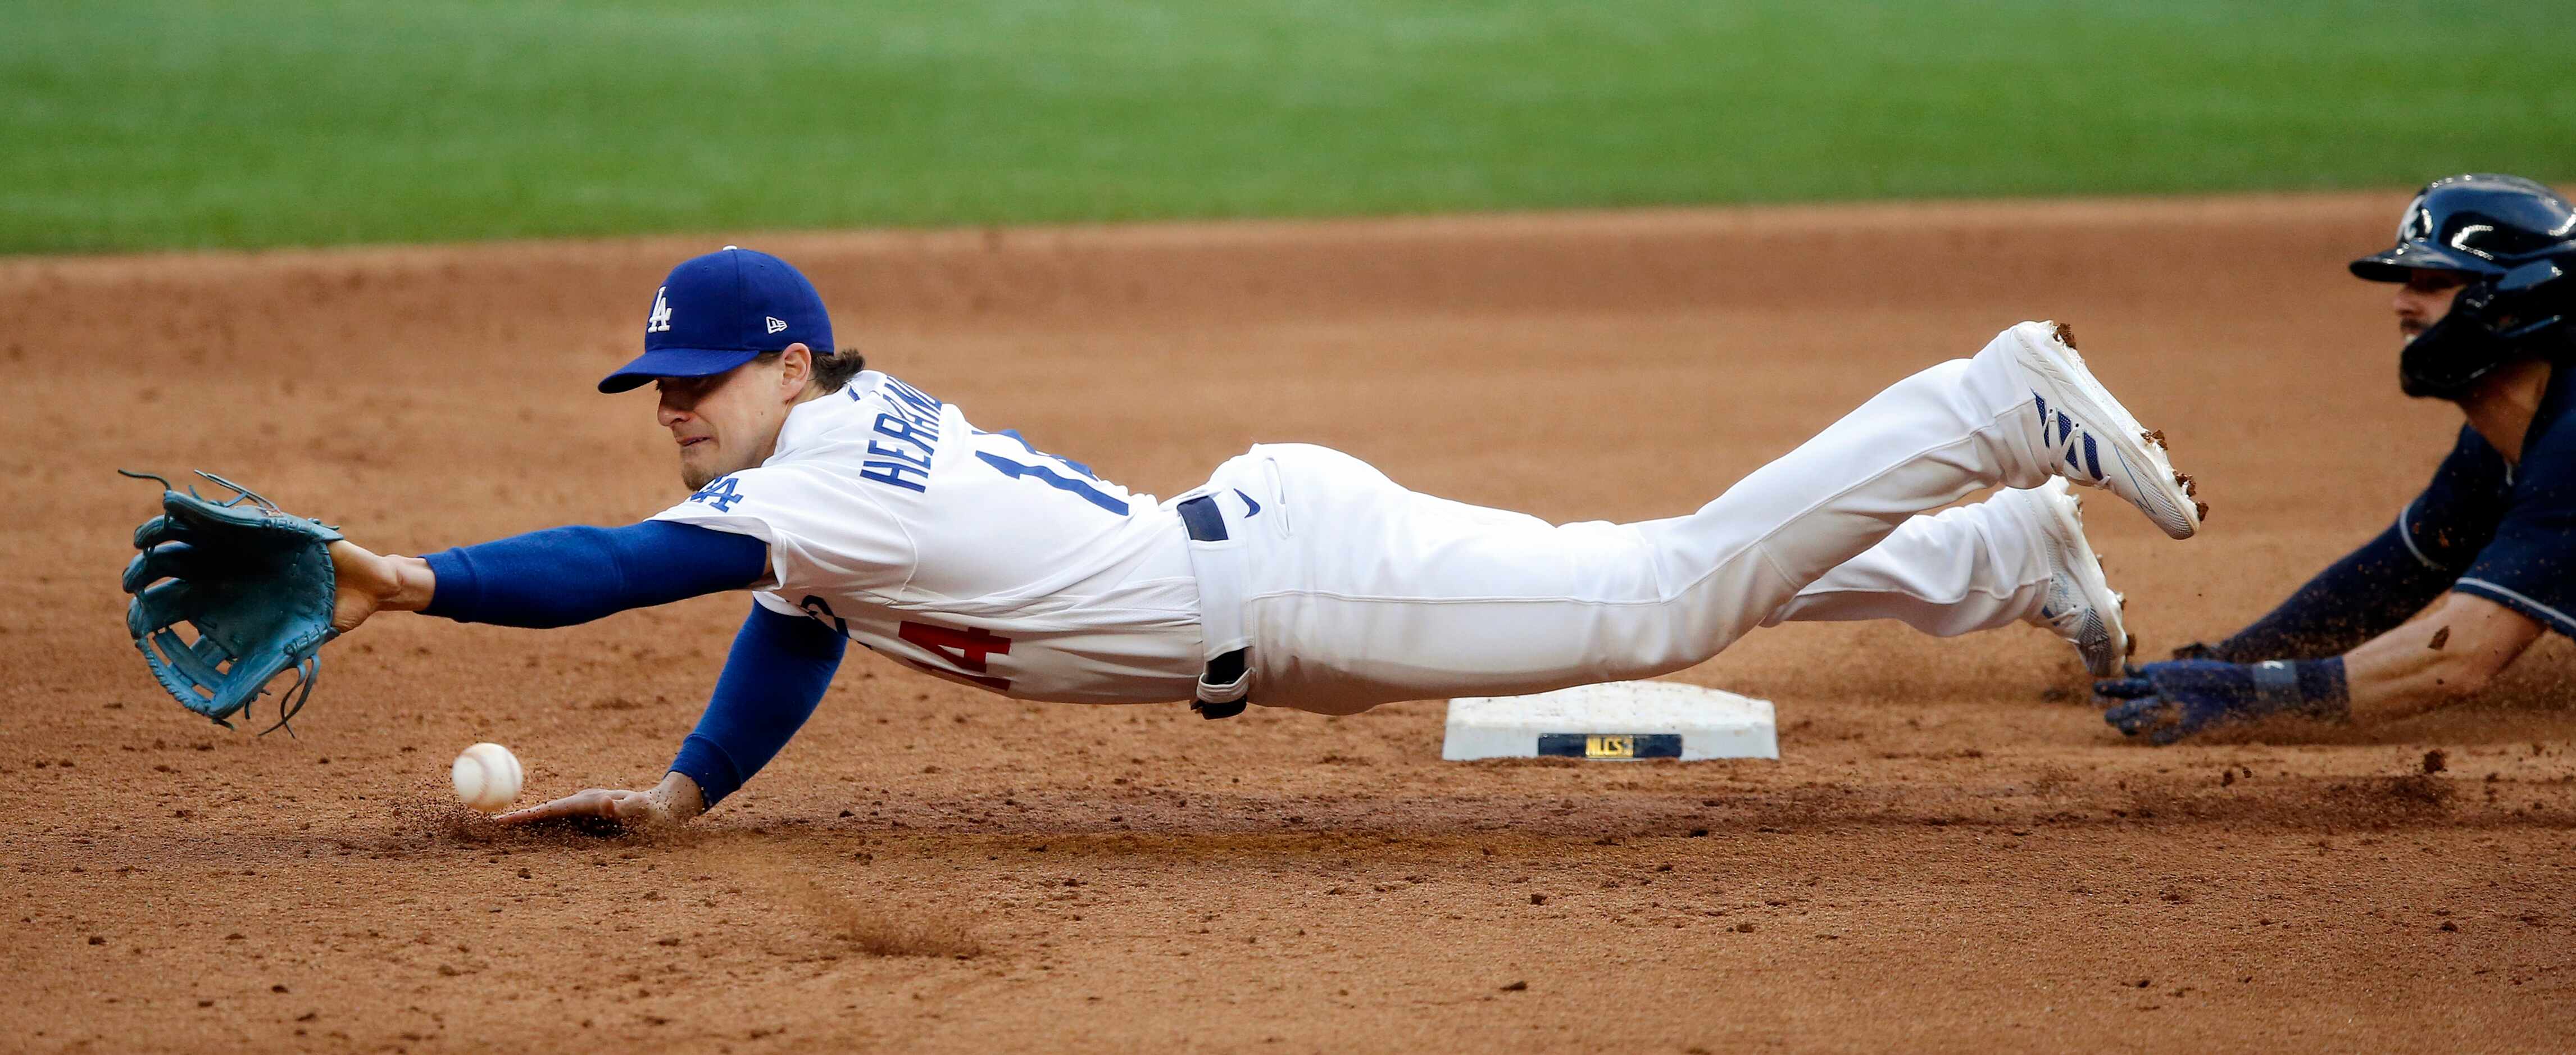 Los Angeles Dodgers second baseman Enrique Hernandez (14) dives for a ball thrown on a...